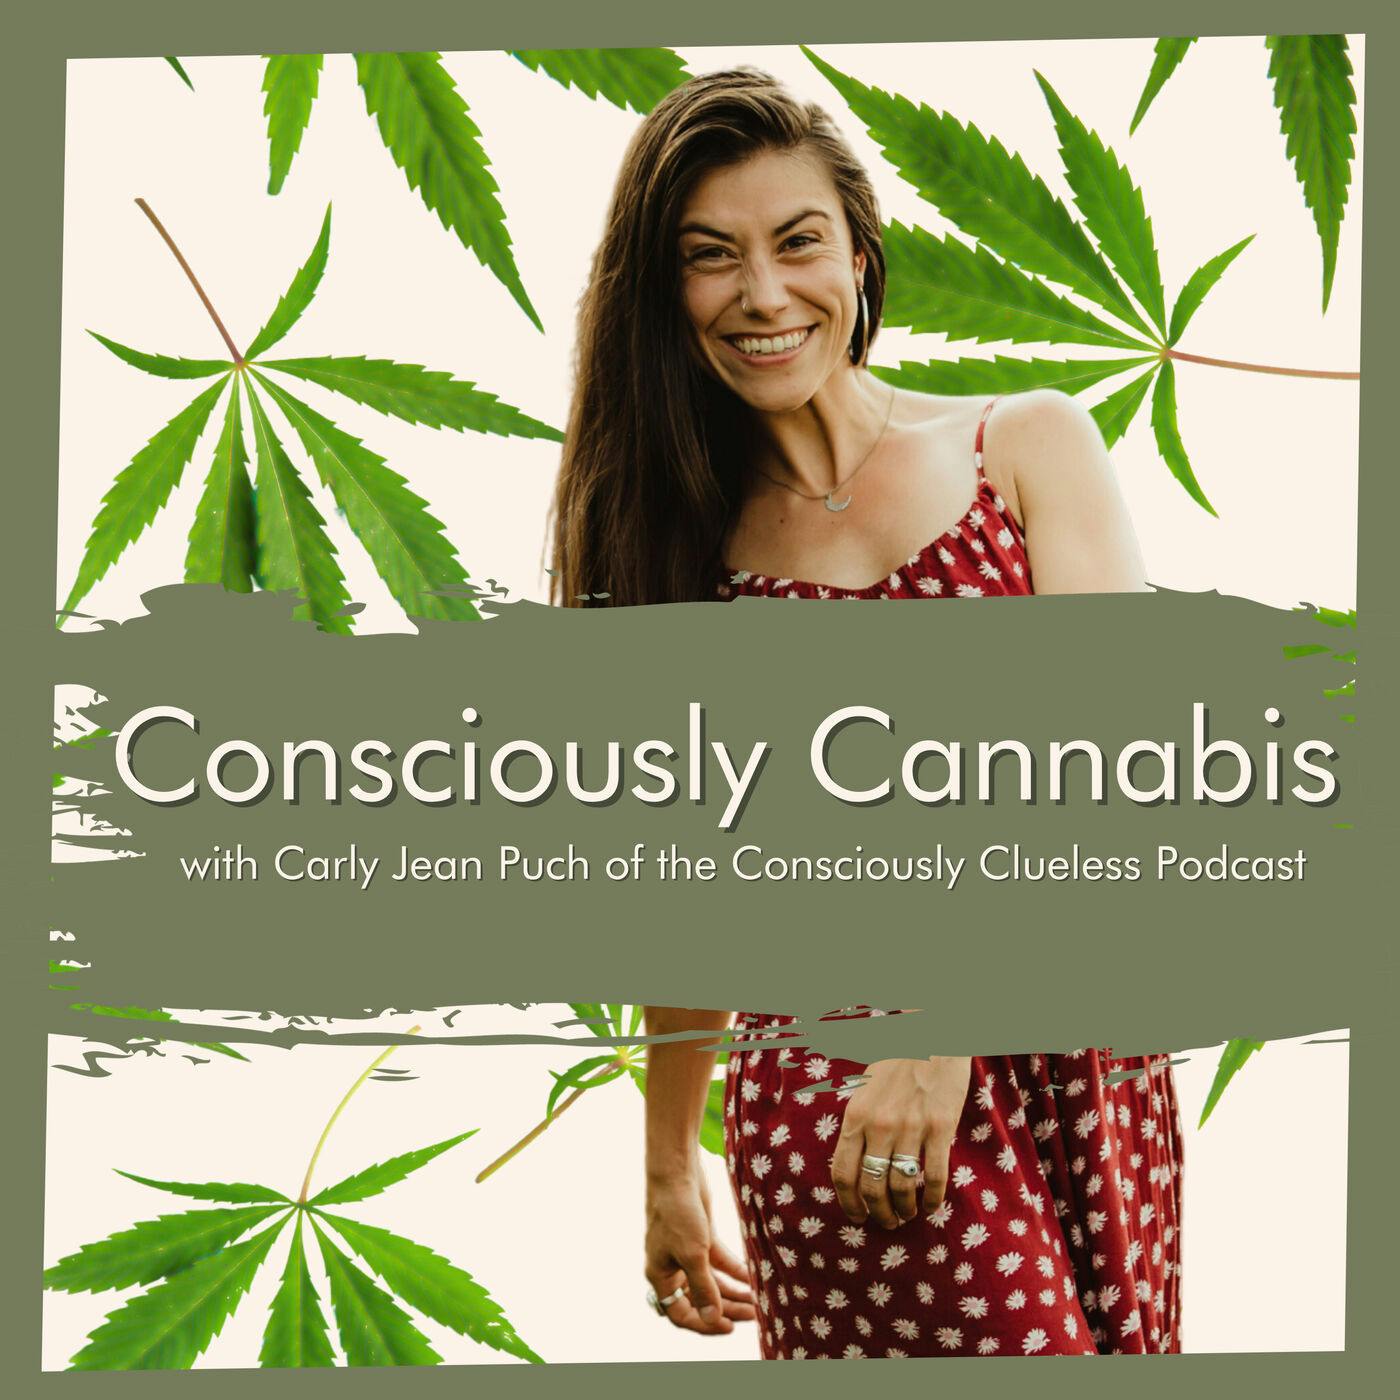 Consciously Cannabis - Green Gains: Unpacking Cannabis, Sustainability, and Law with Mitchell Colbert